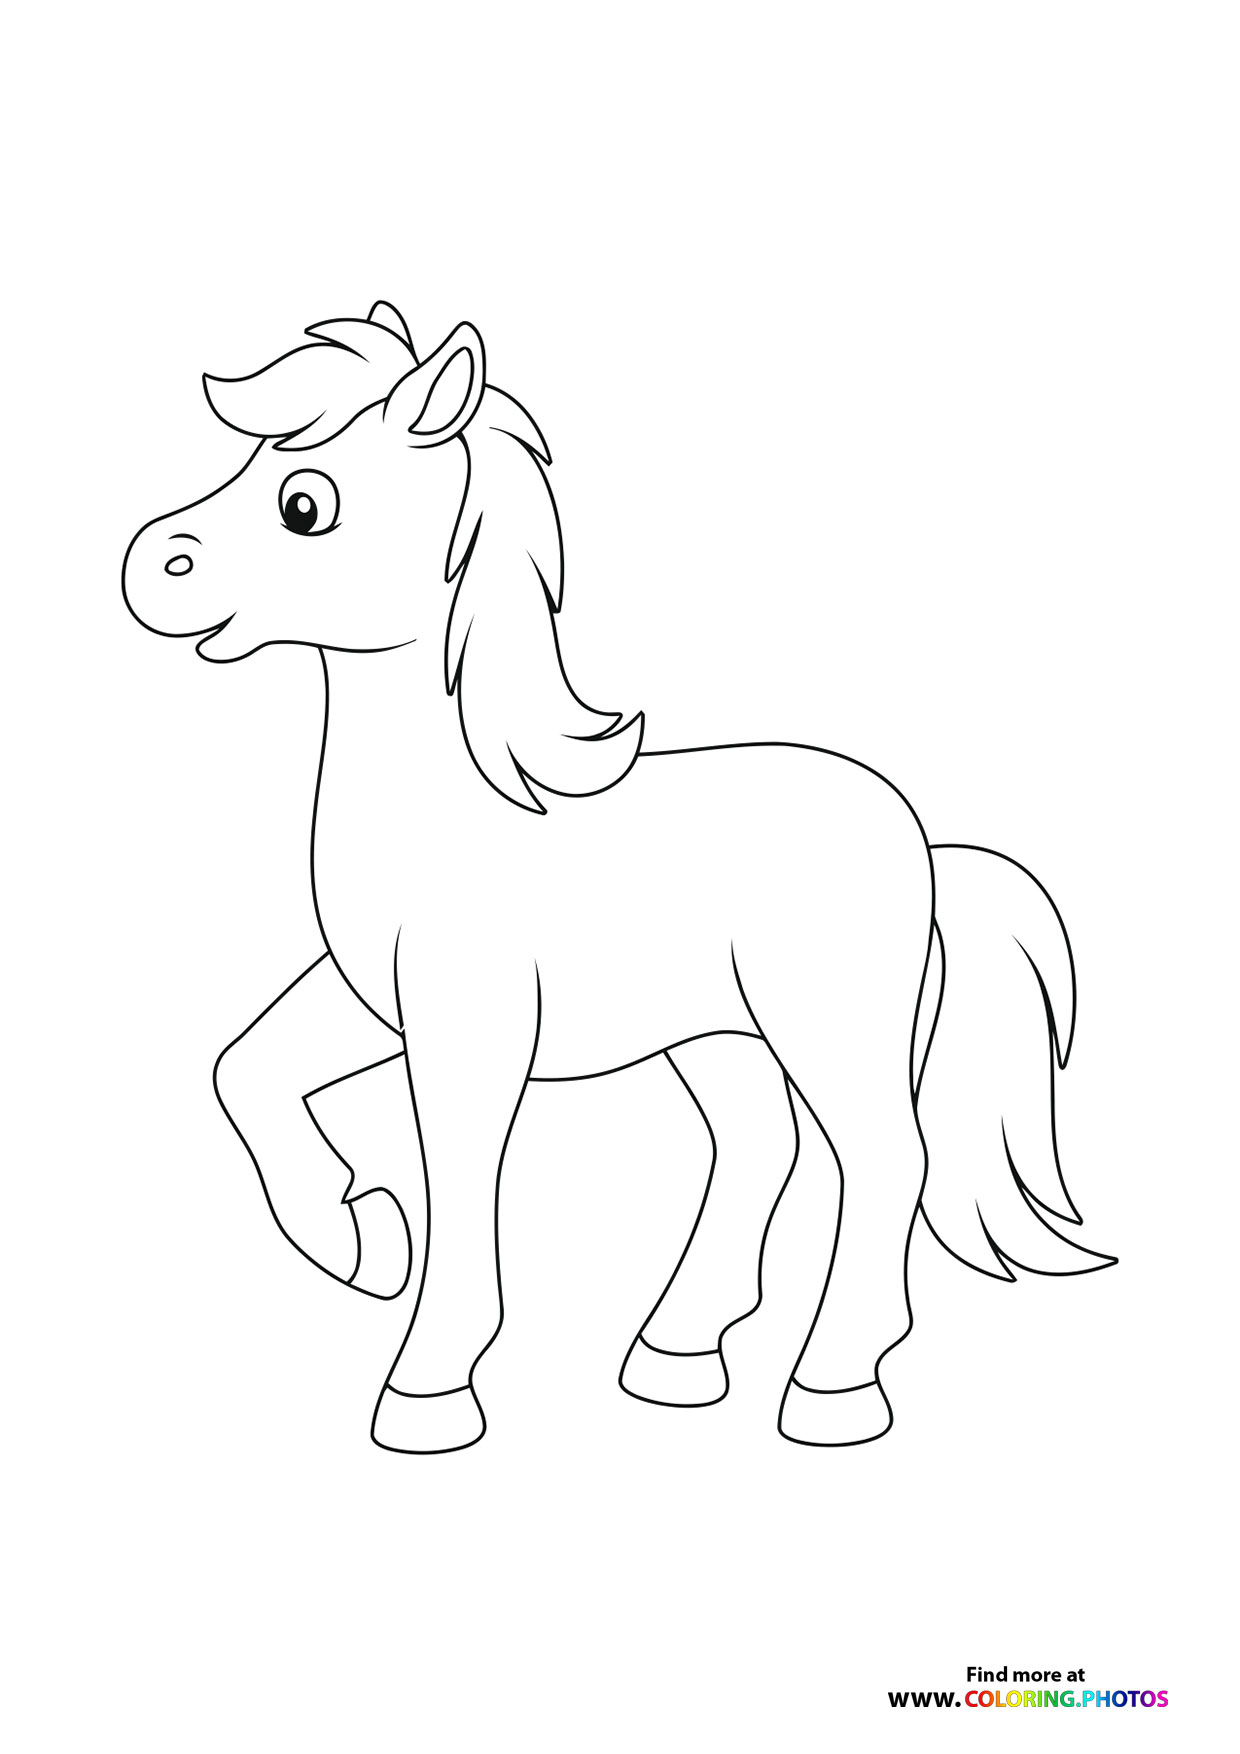 Nice horse - Coloring Pages for kids